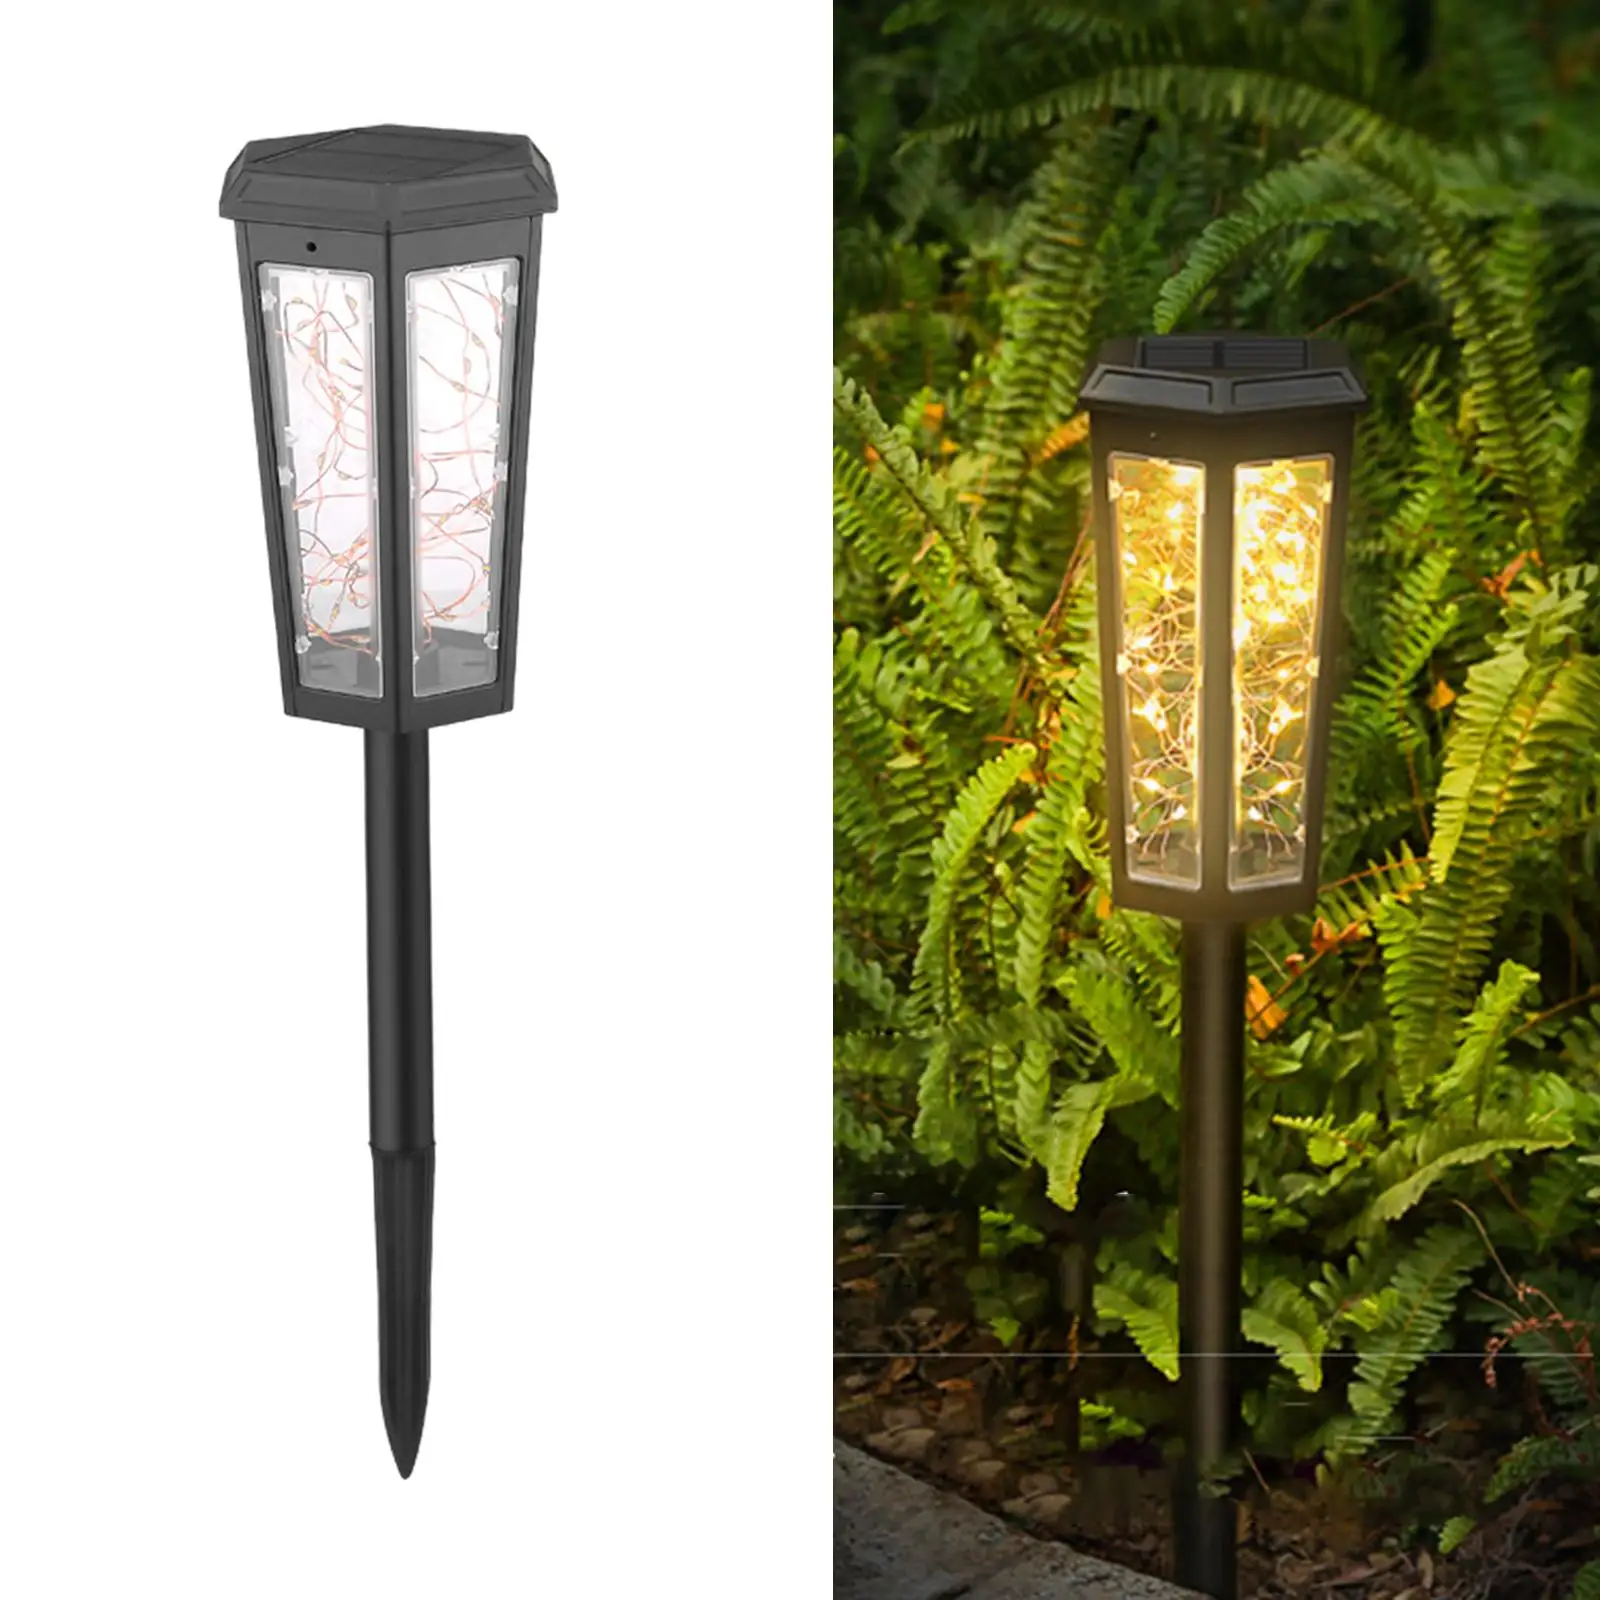 Solar Garden Stakes Lights LED Landscape Lighting Decorative Outdoor Pathway Light for Lawn Outside Ground Decor Patio Party